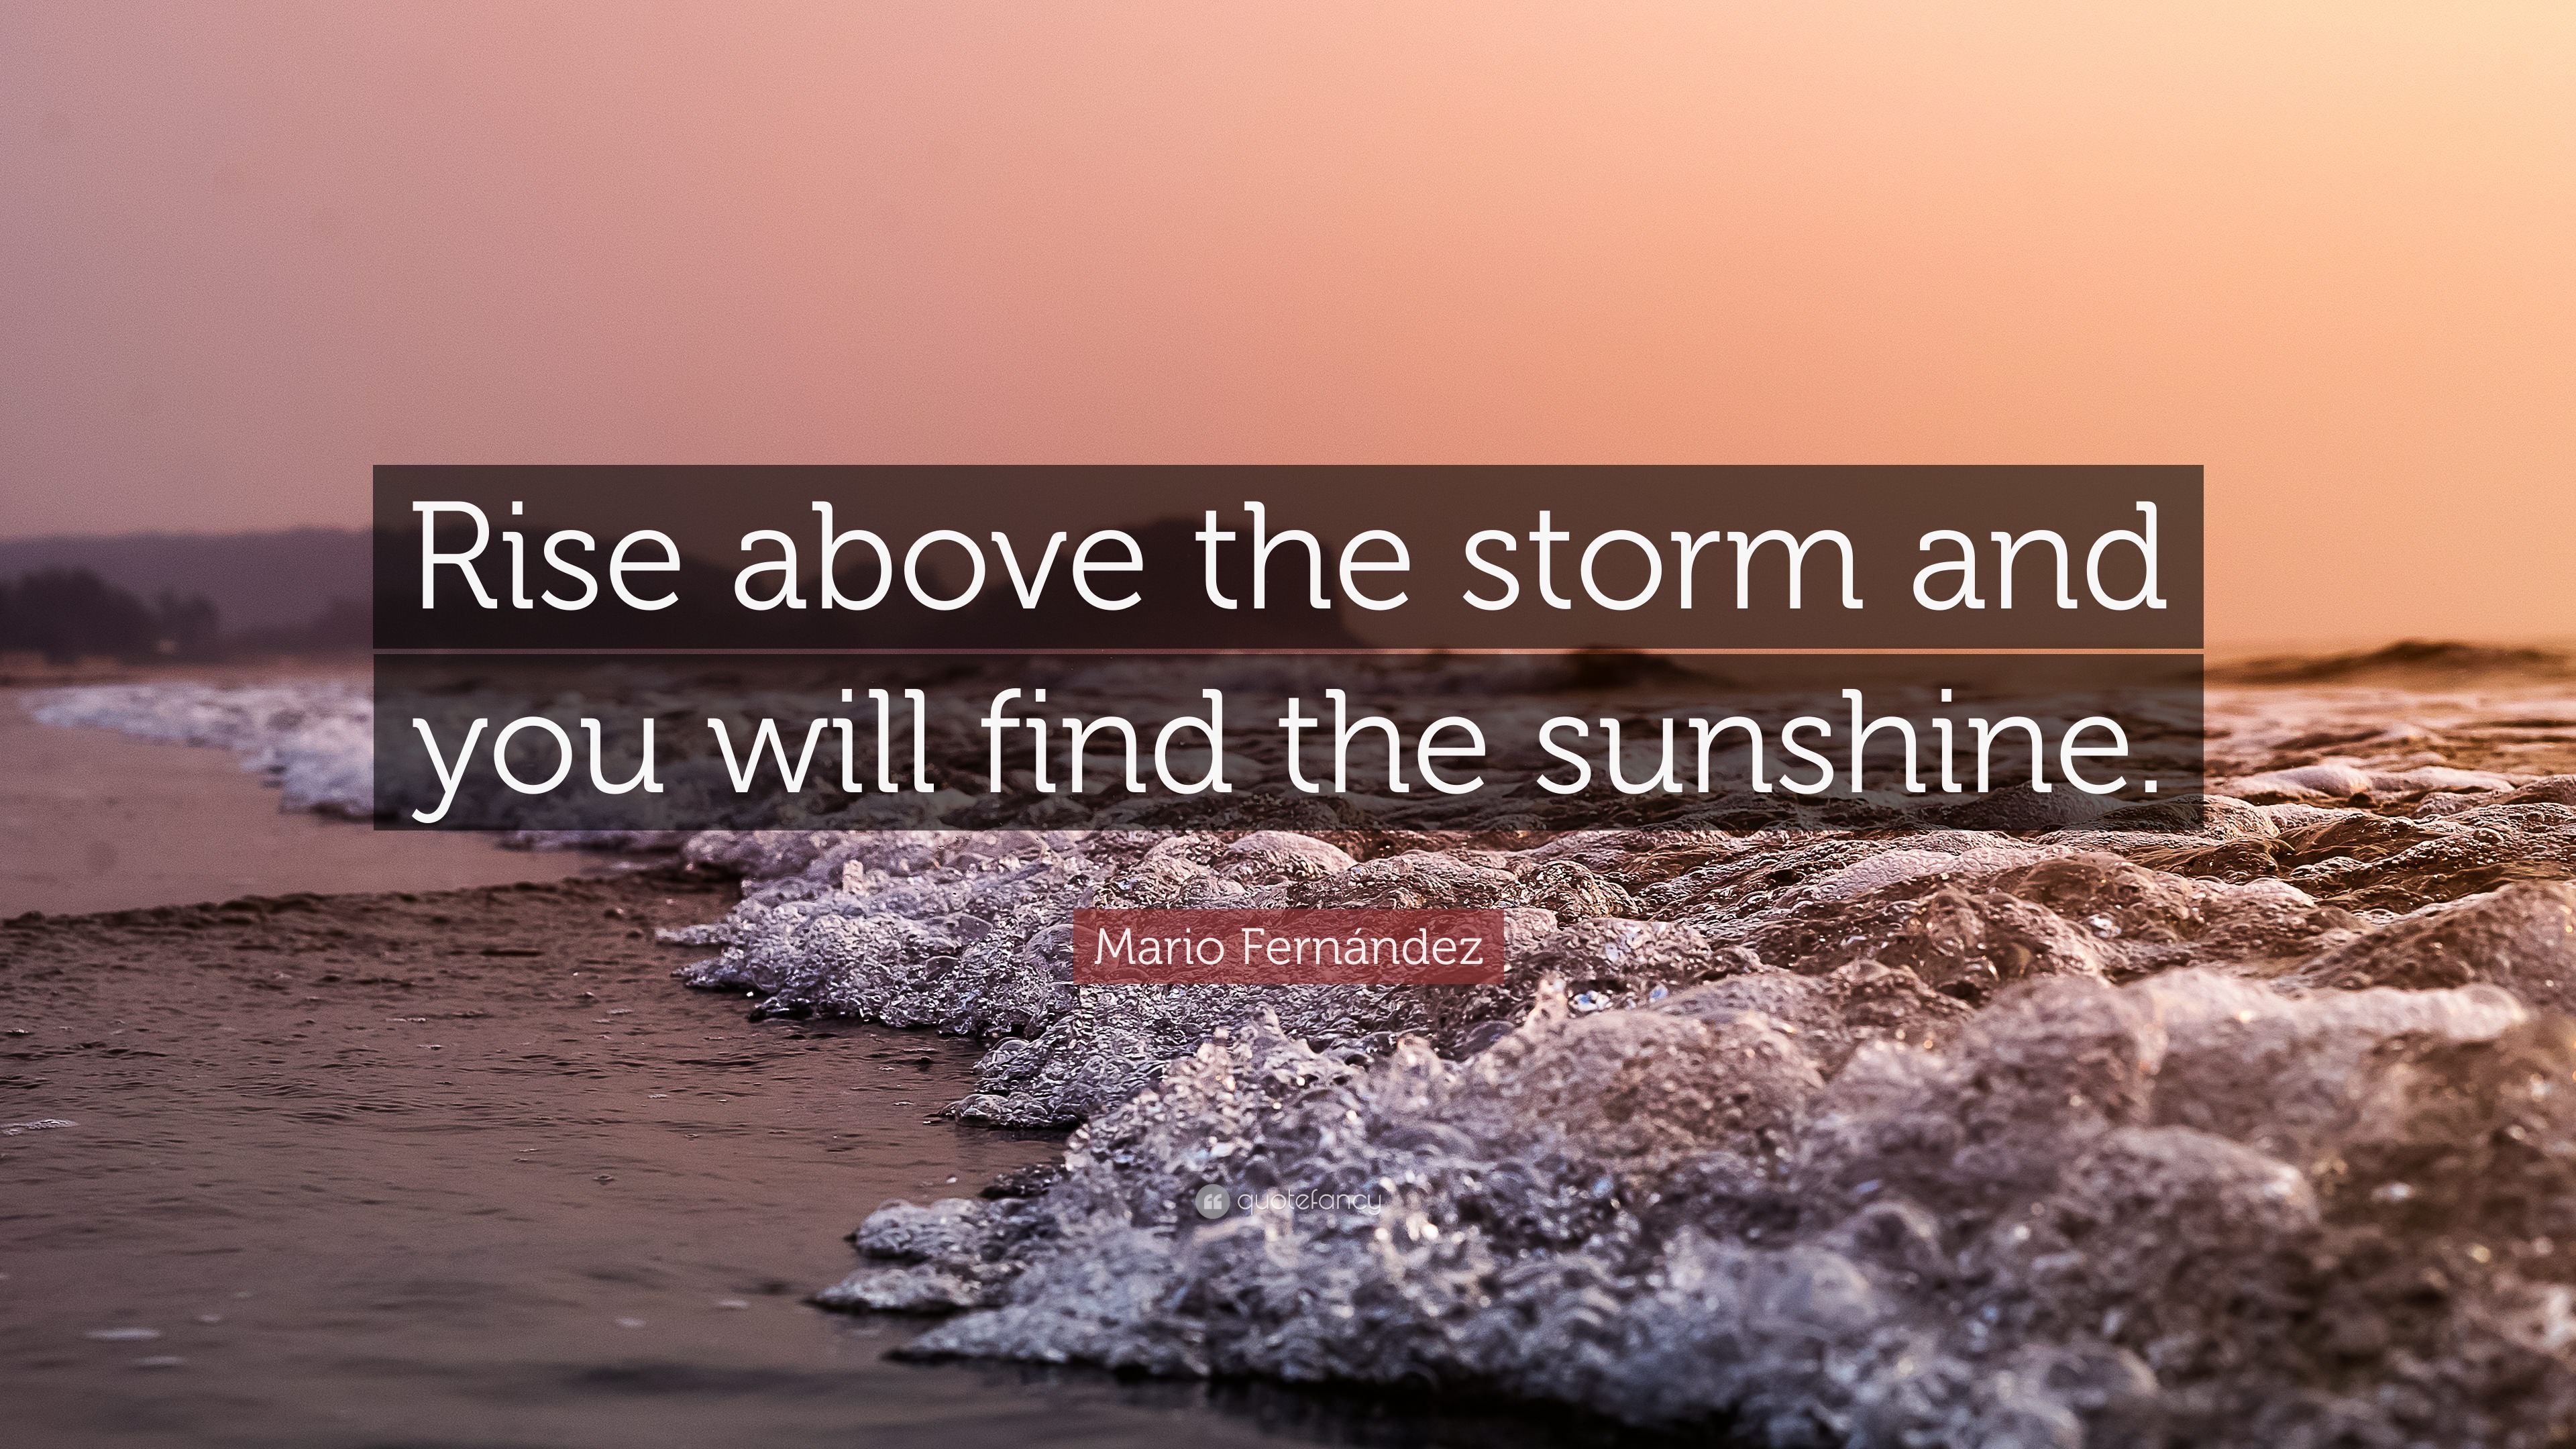 Mario Fernández Quote: “Rise above the storm and you will find the